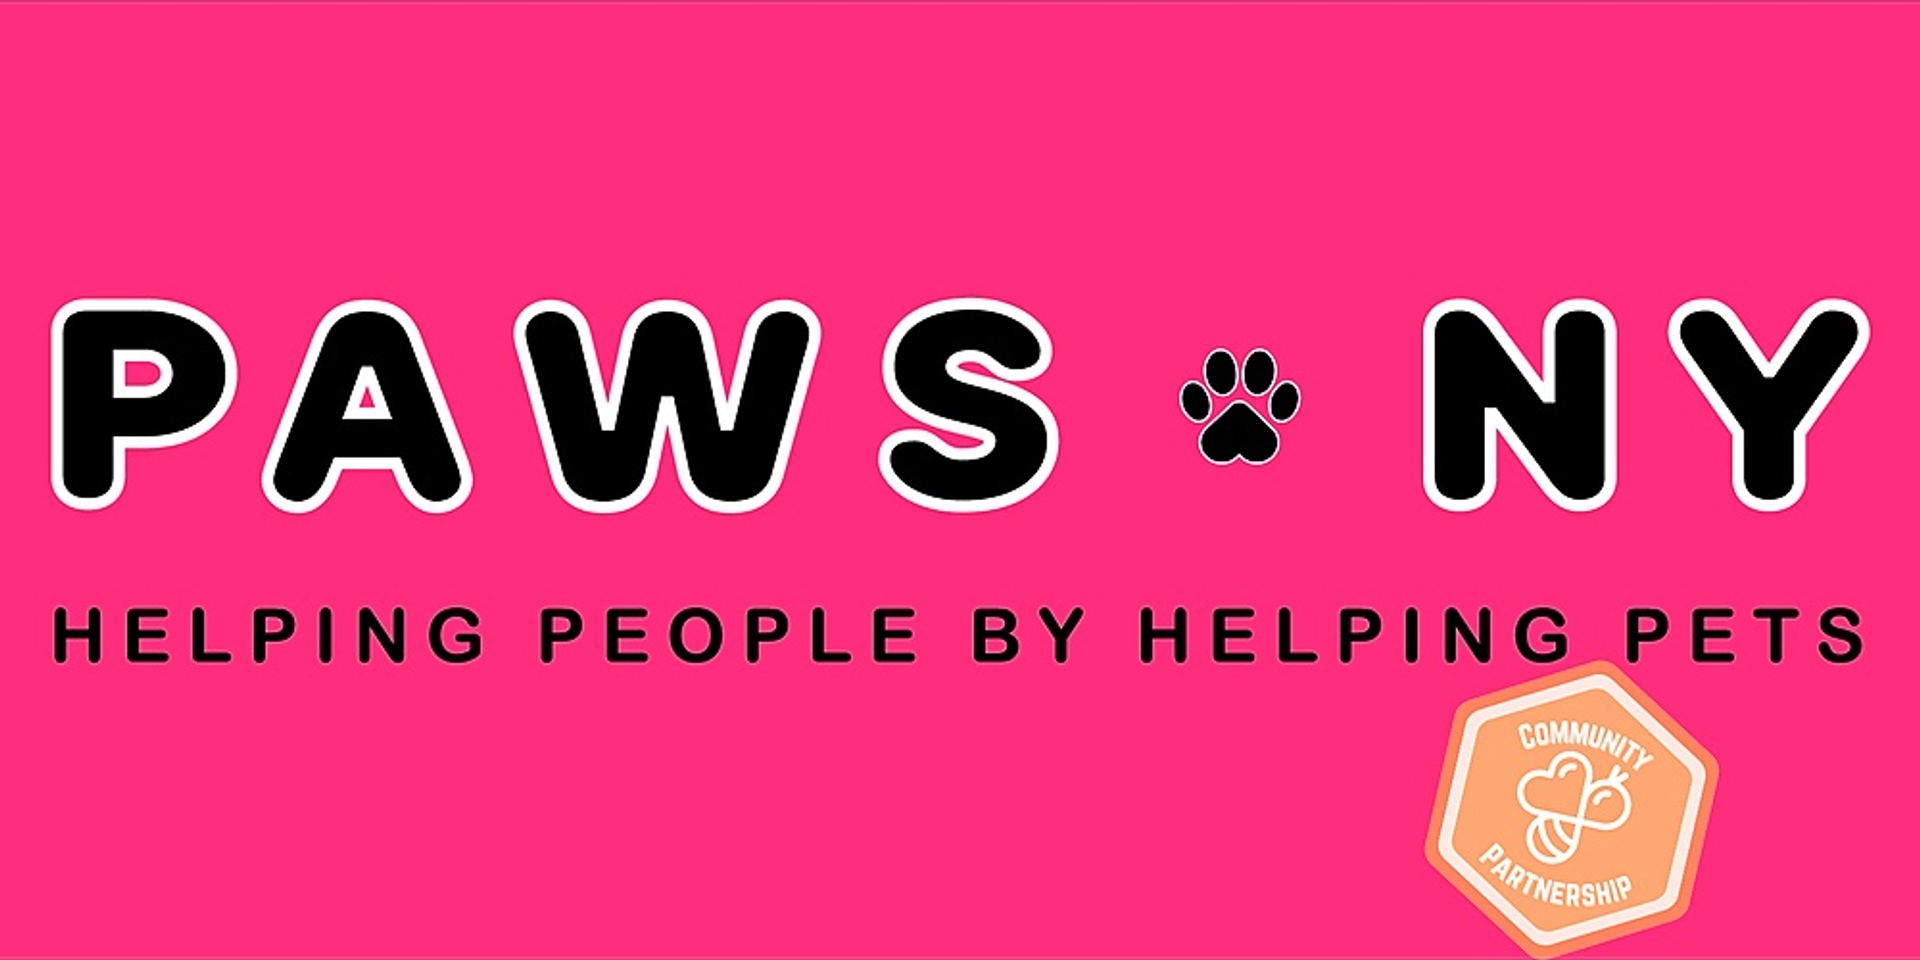 Make House Calls to Help Pet Owners with Their Furry Friends! (PAWS NY)